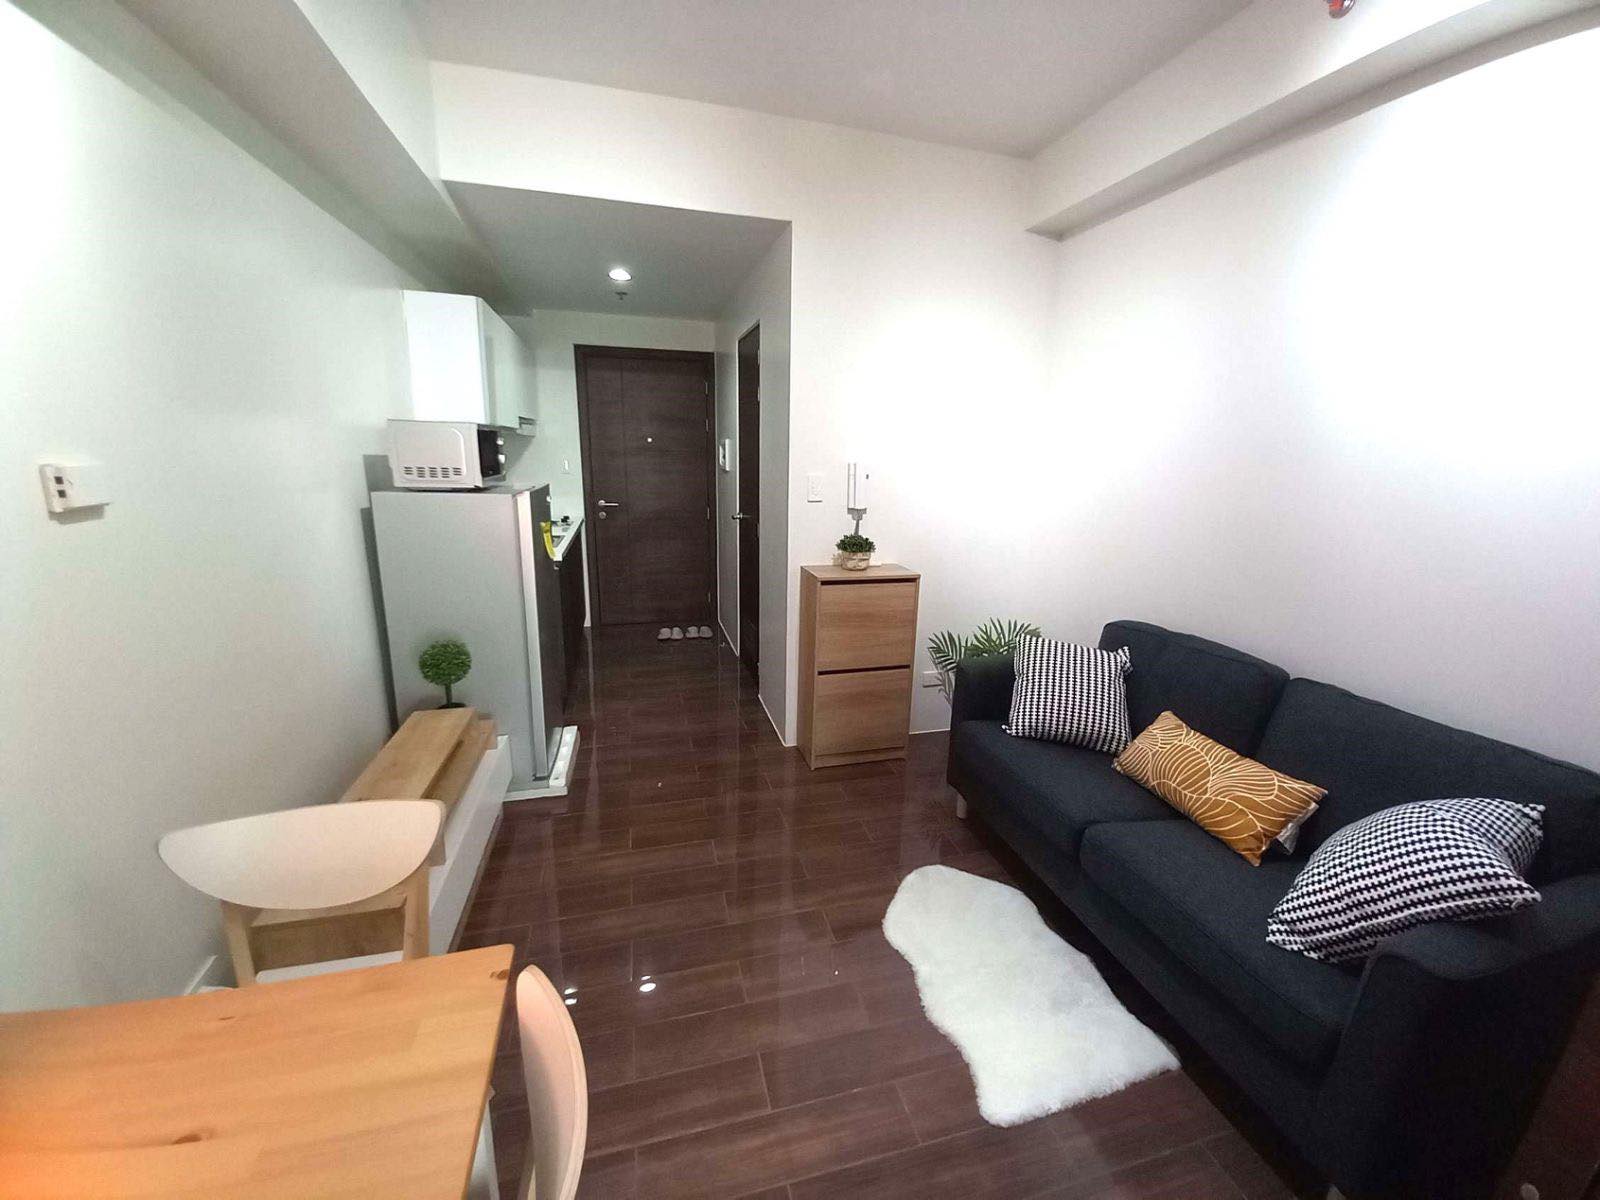 FOR SALE 1BR UNIT AT AIR RESIDENCES MAKATI